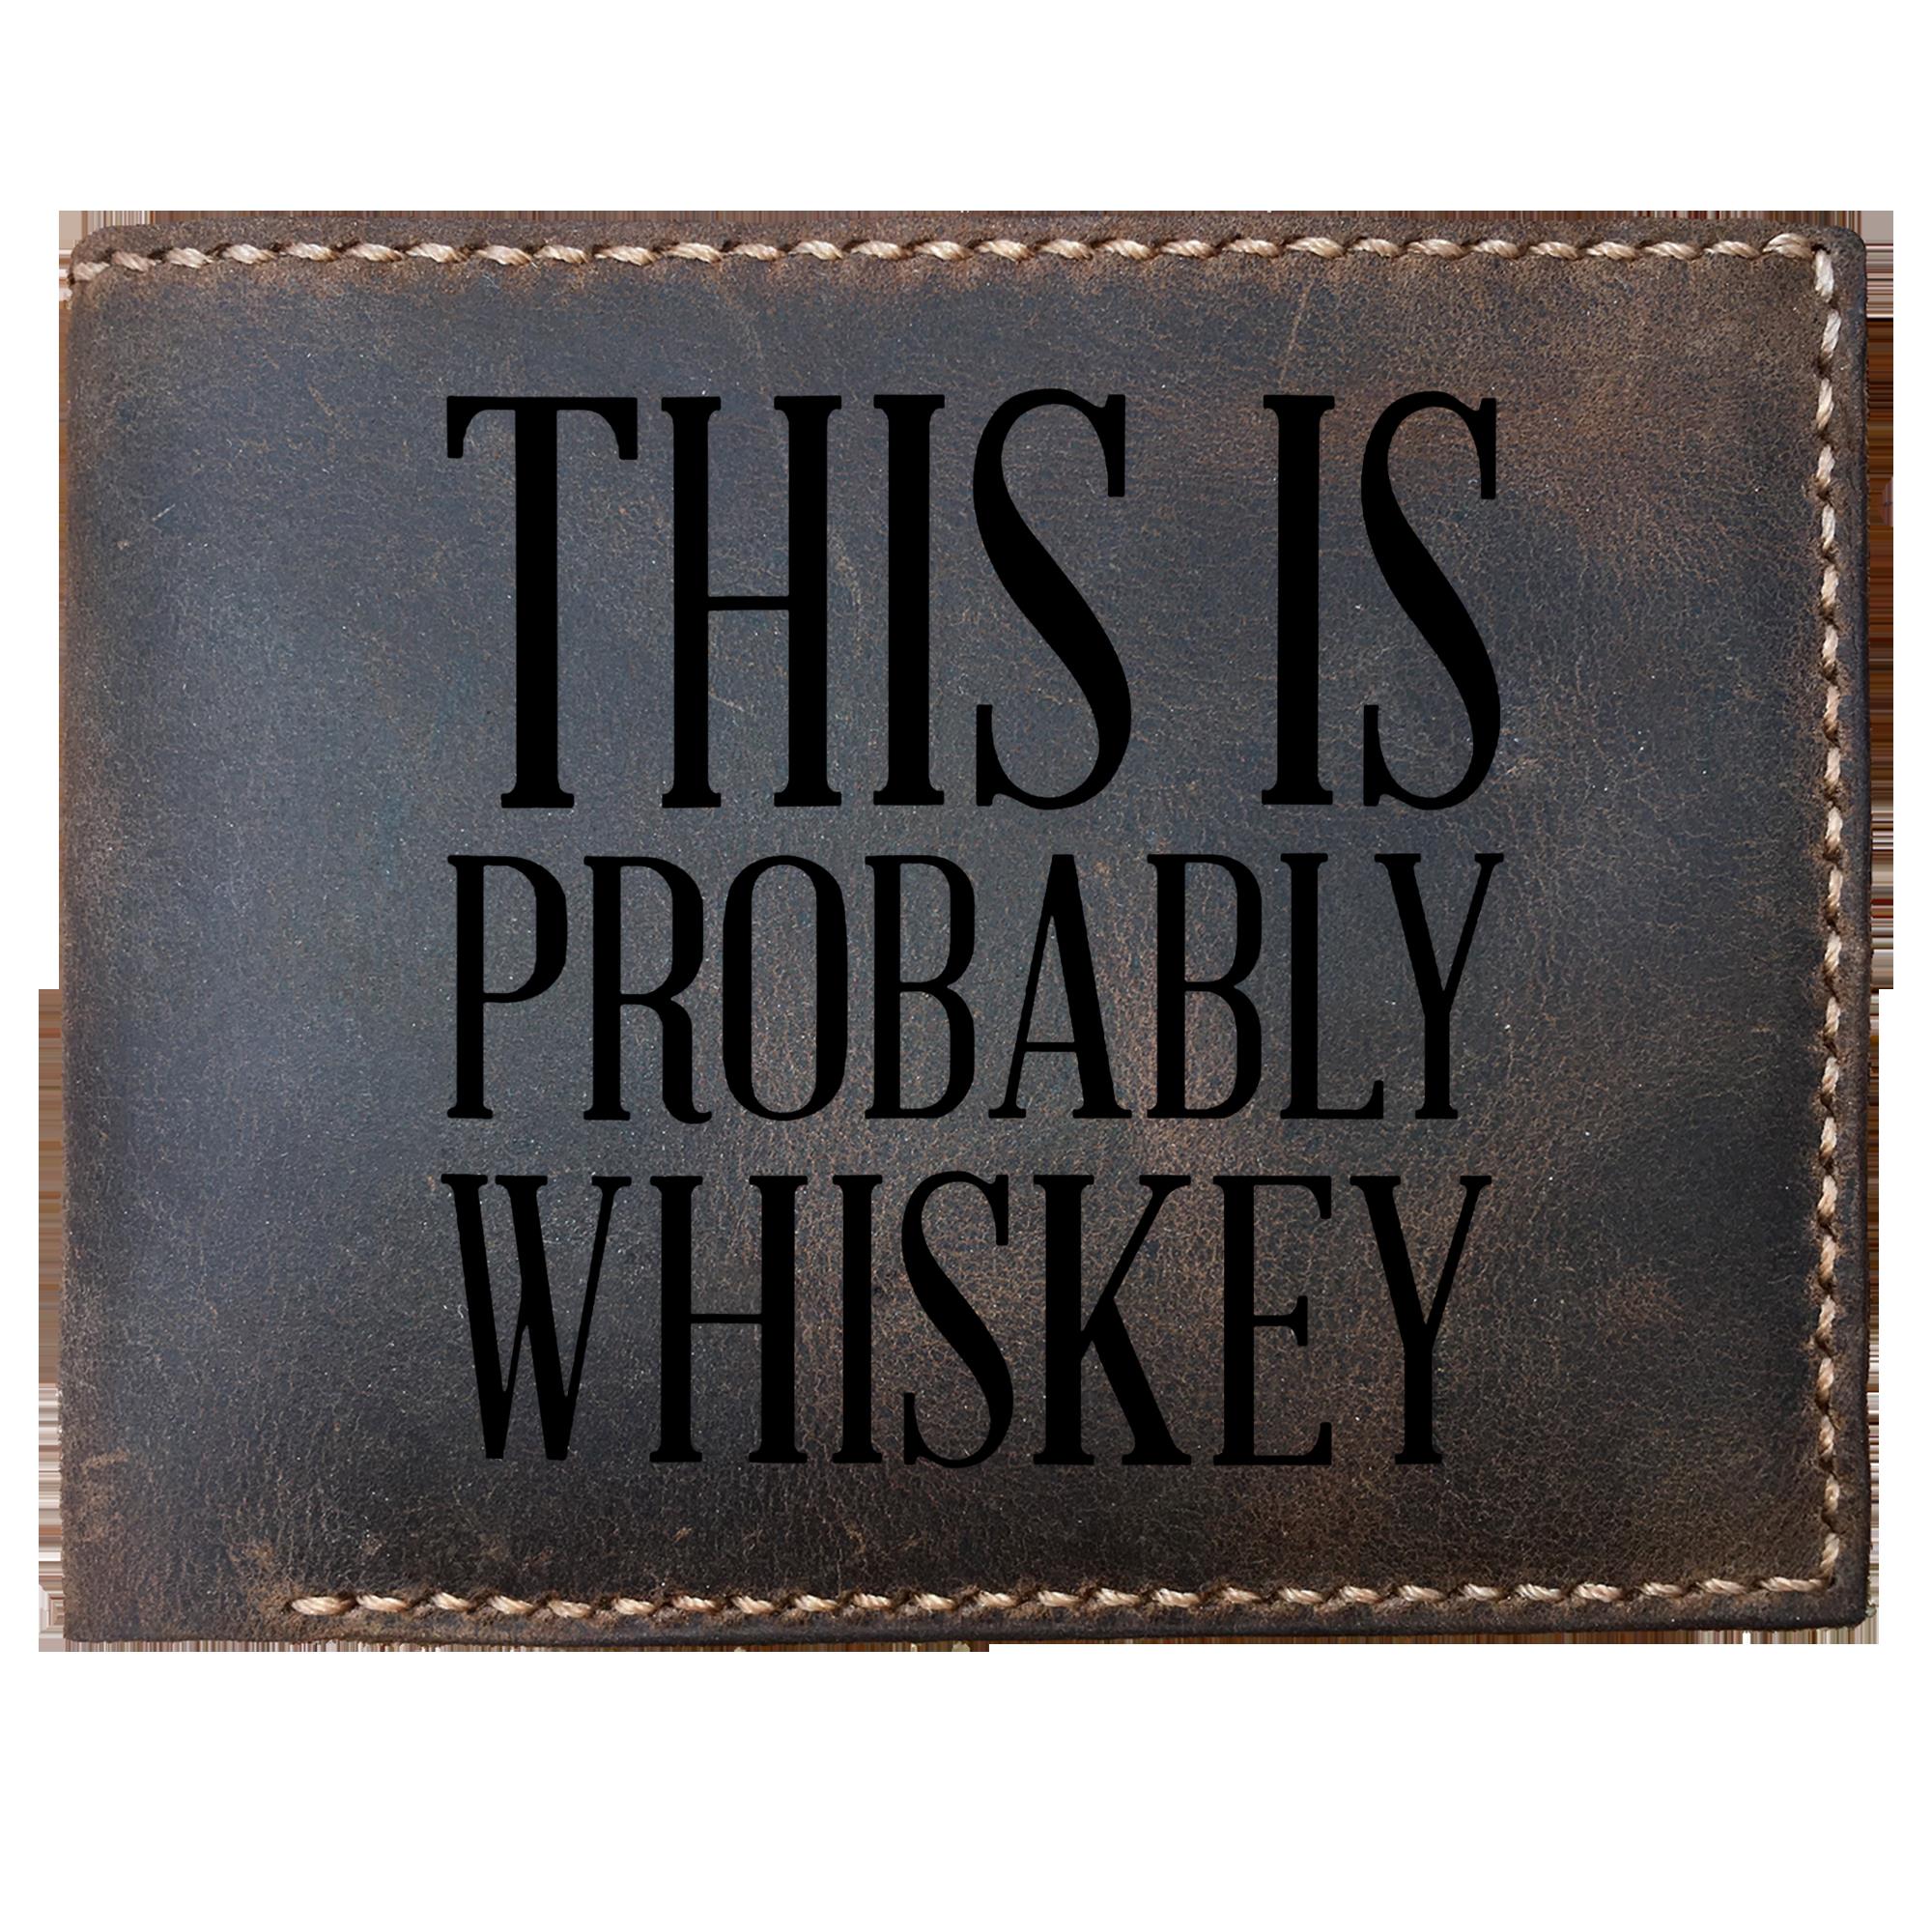 Skitongifts Funny Custom Laser Engraved Bifold Leather Wallet For Men, This Is Probably Whiskey